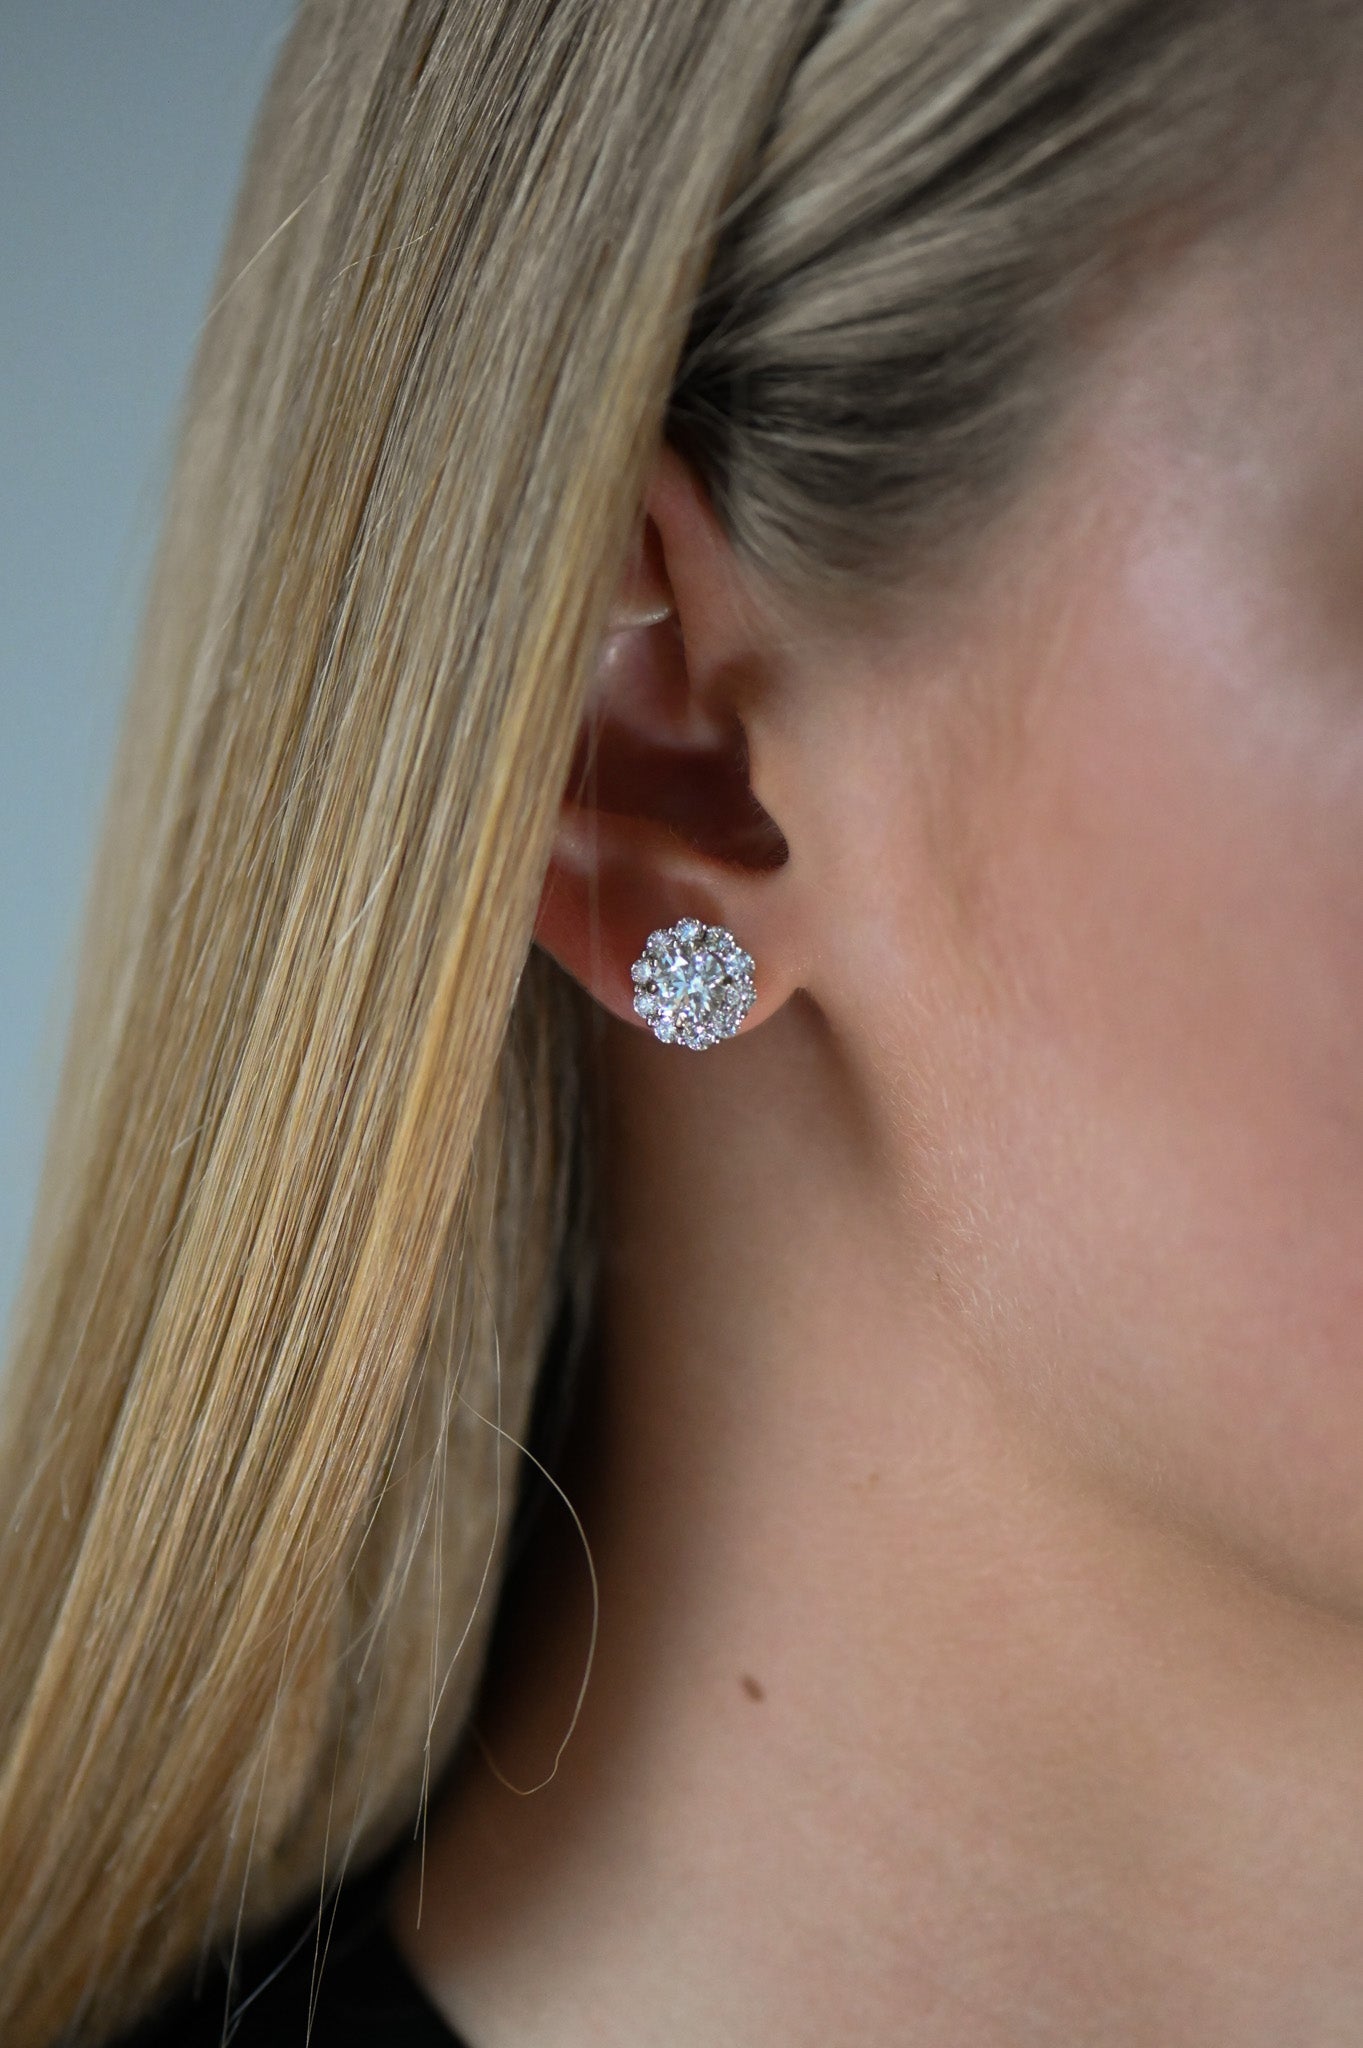 Aggregate more than 73 halo diamond earrings 1 ct best